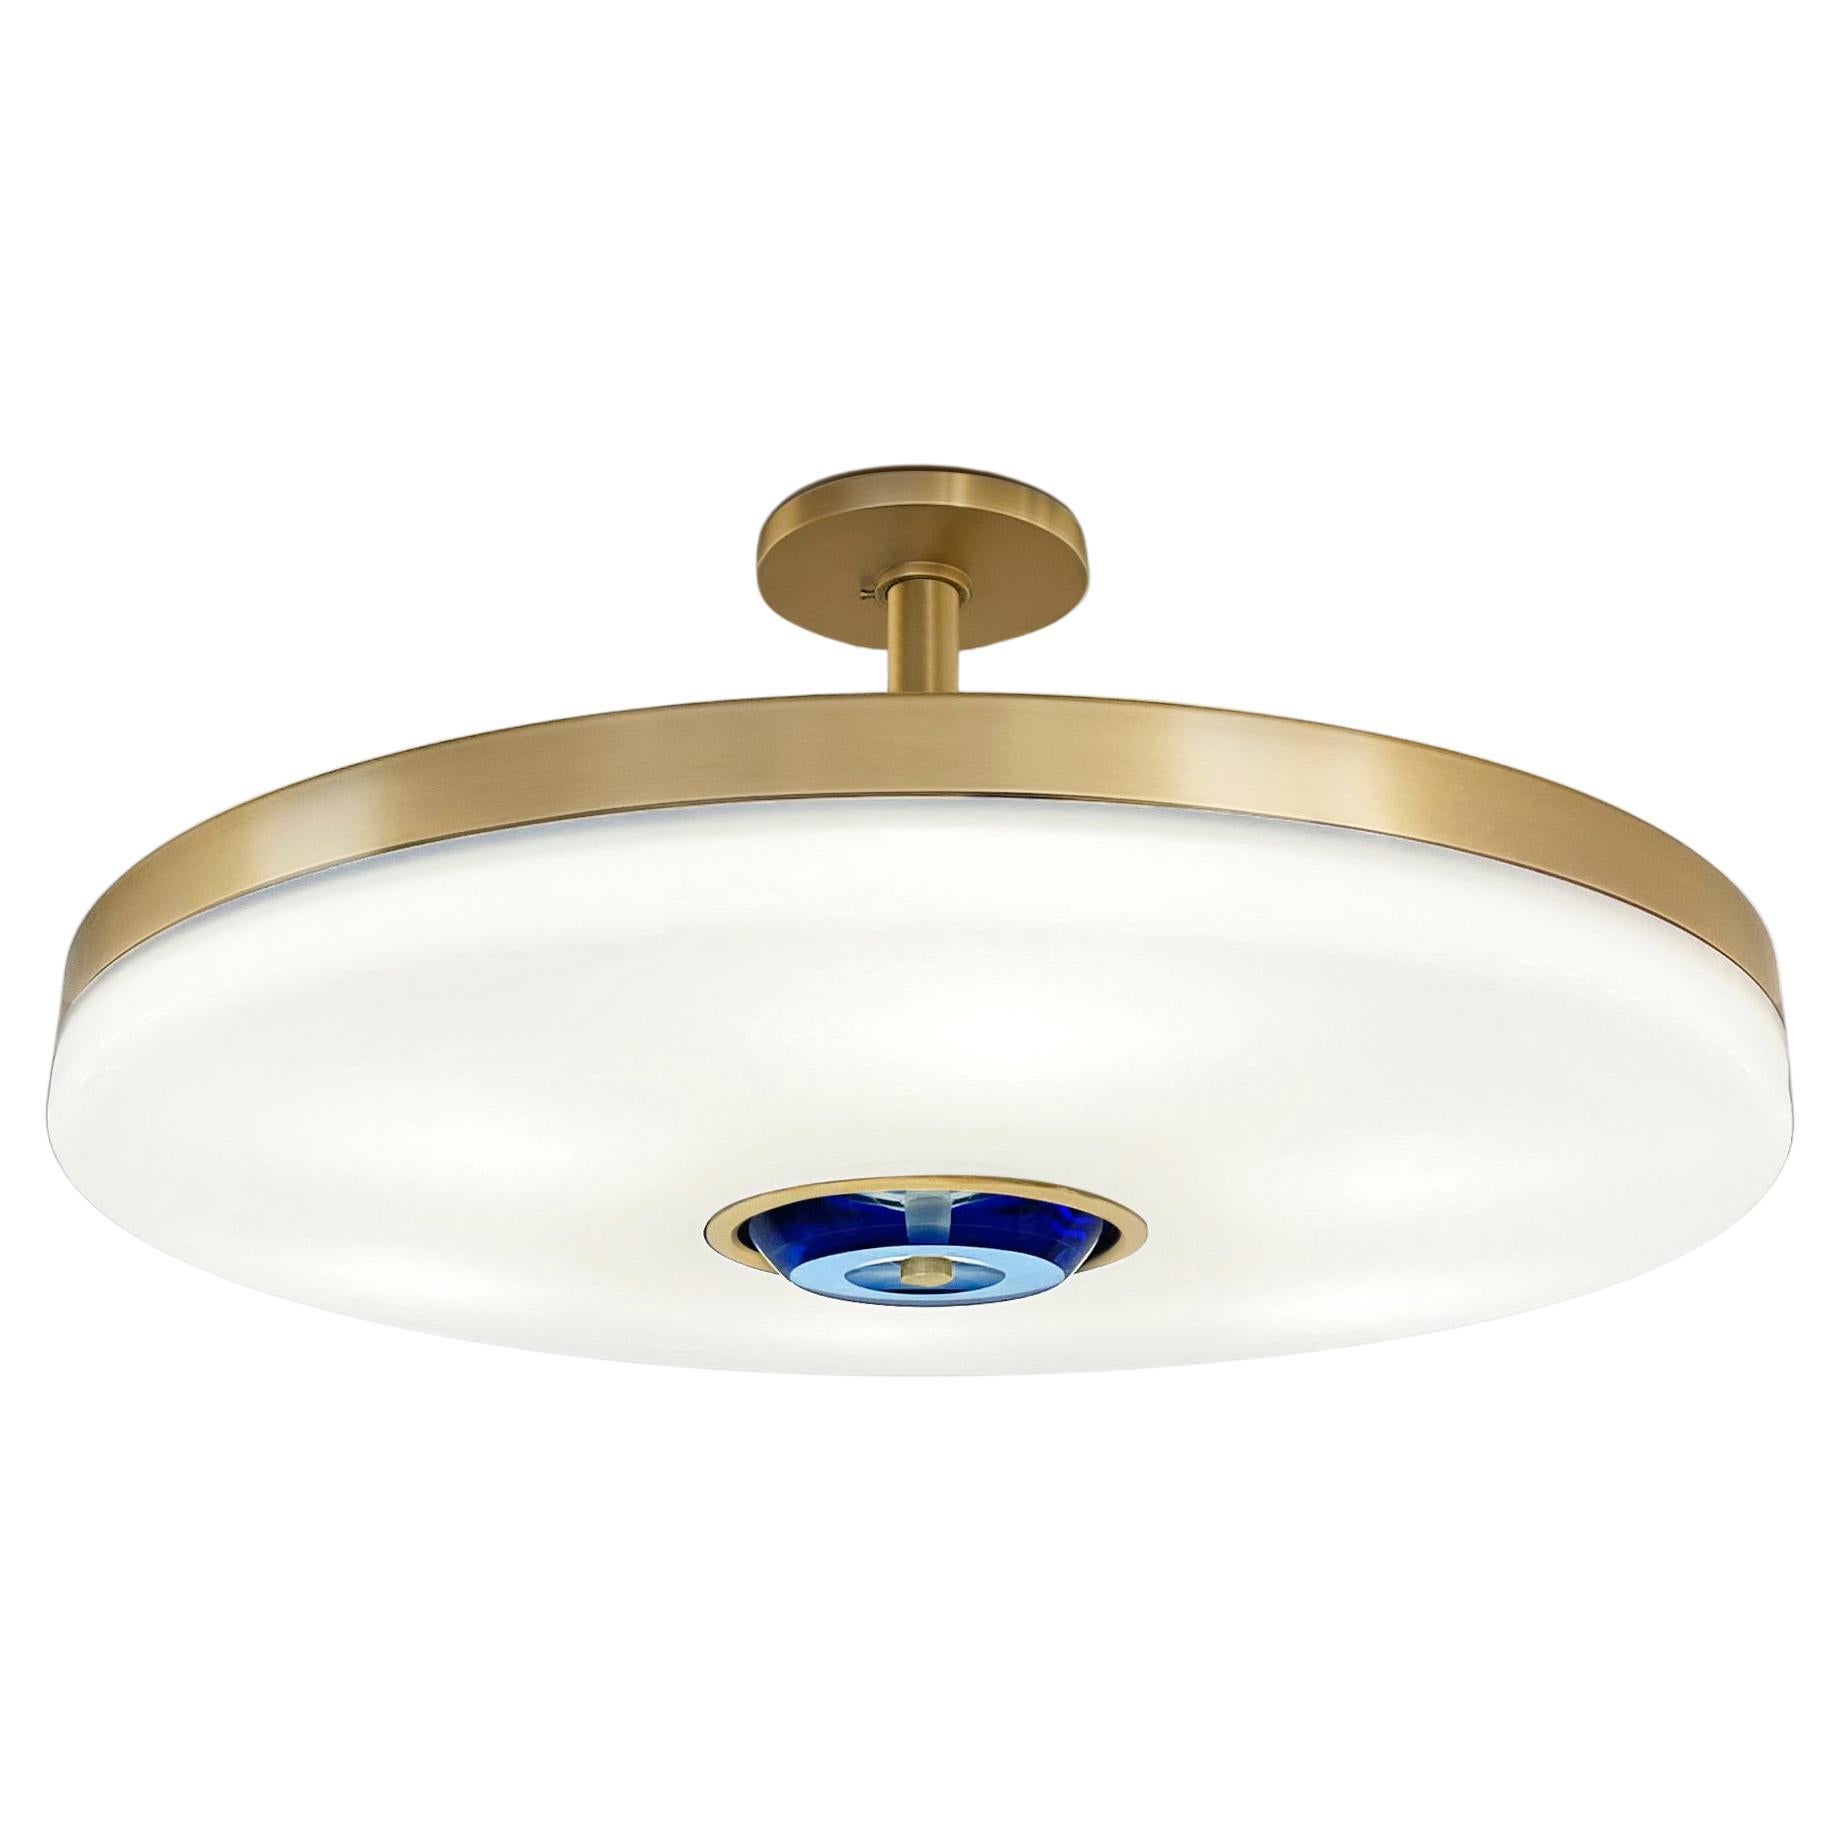 Iris Ceiling Light by Gaspare Asaro-Satin Brass Finish For Sale